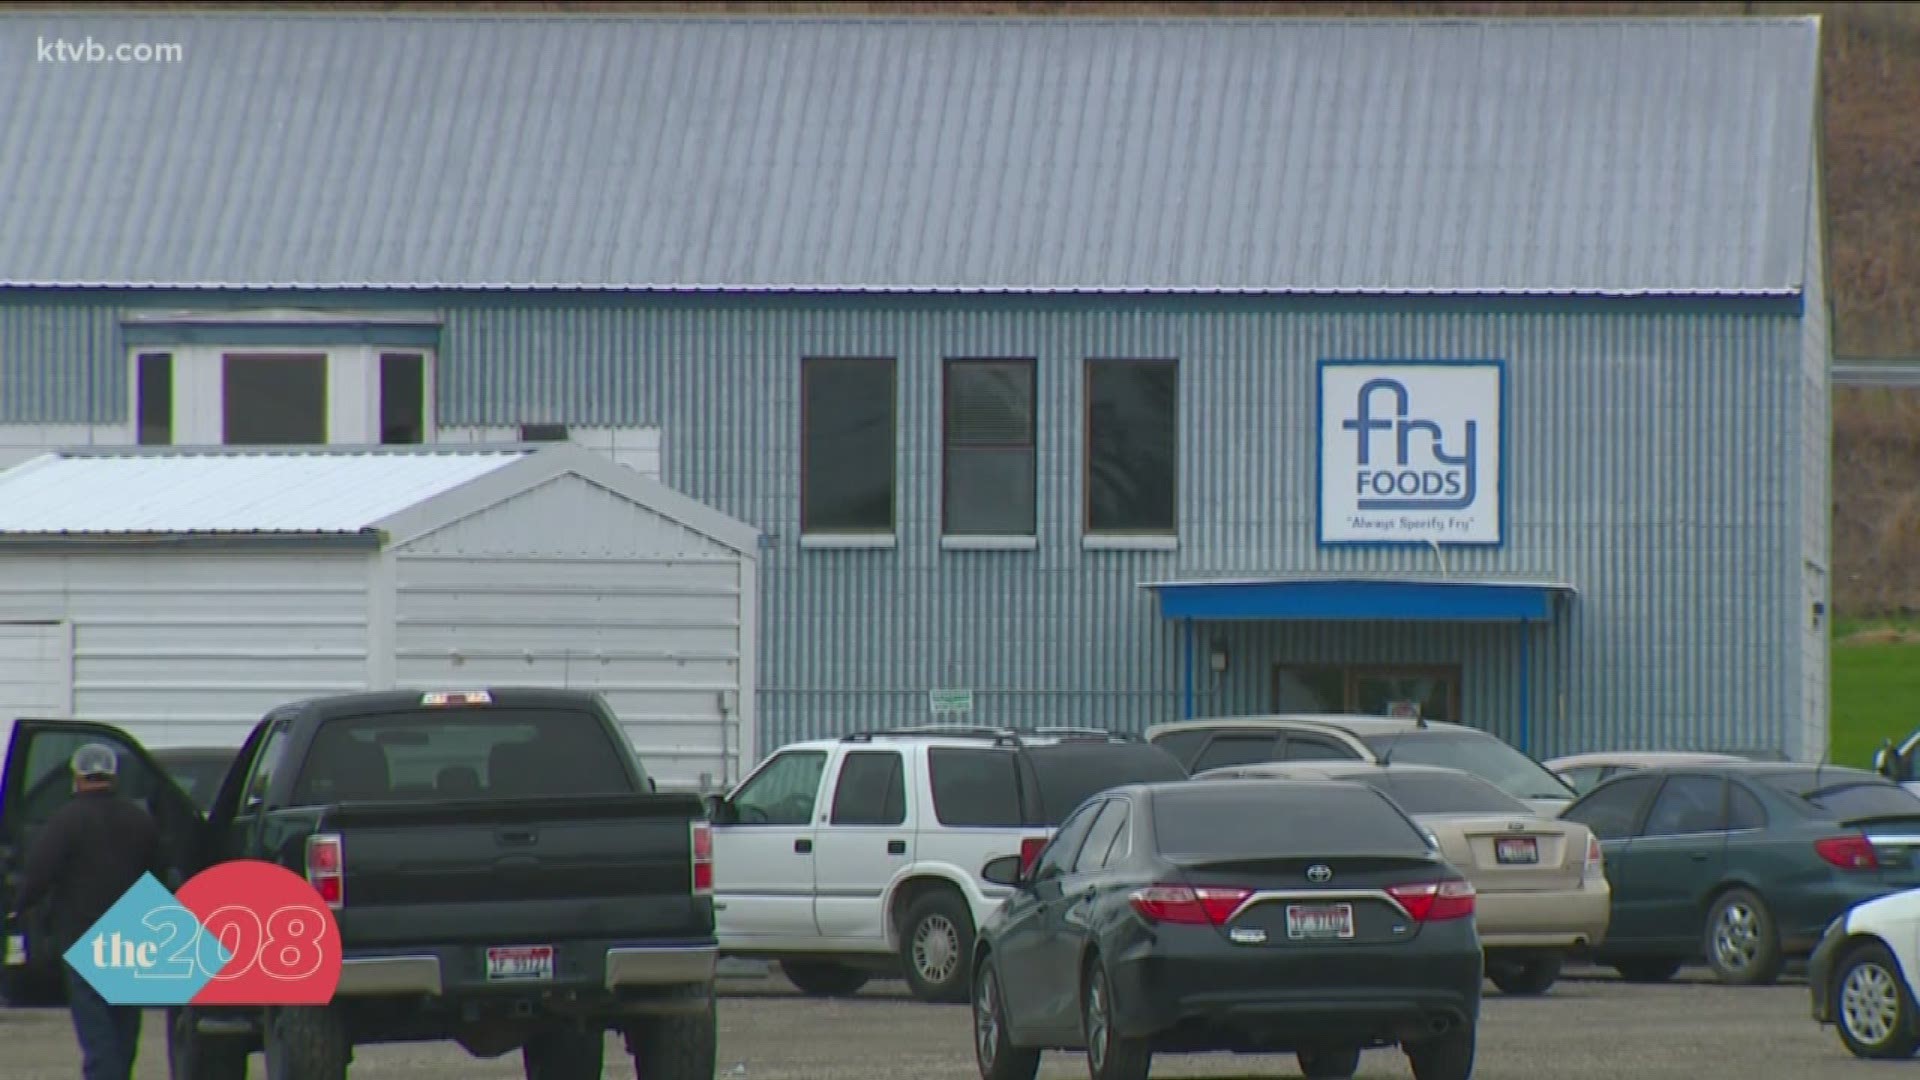 A food processing plant in Weiser shutdown after one of its employees tested positive for COVID-19. Hear what lessons they learned from the experience.